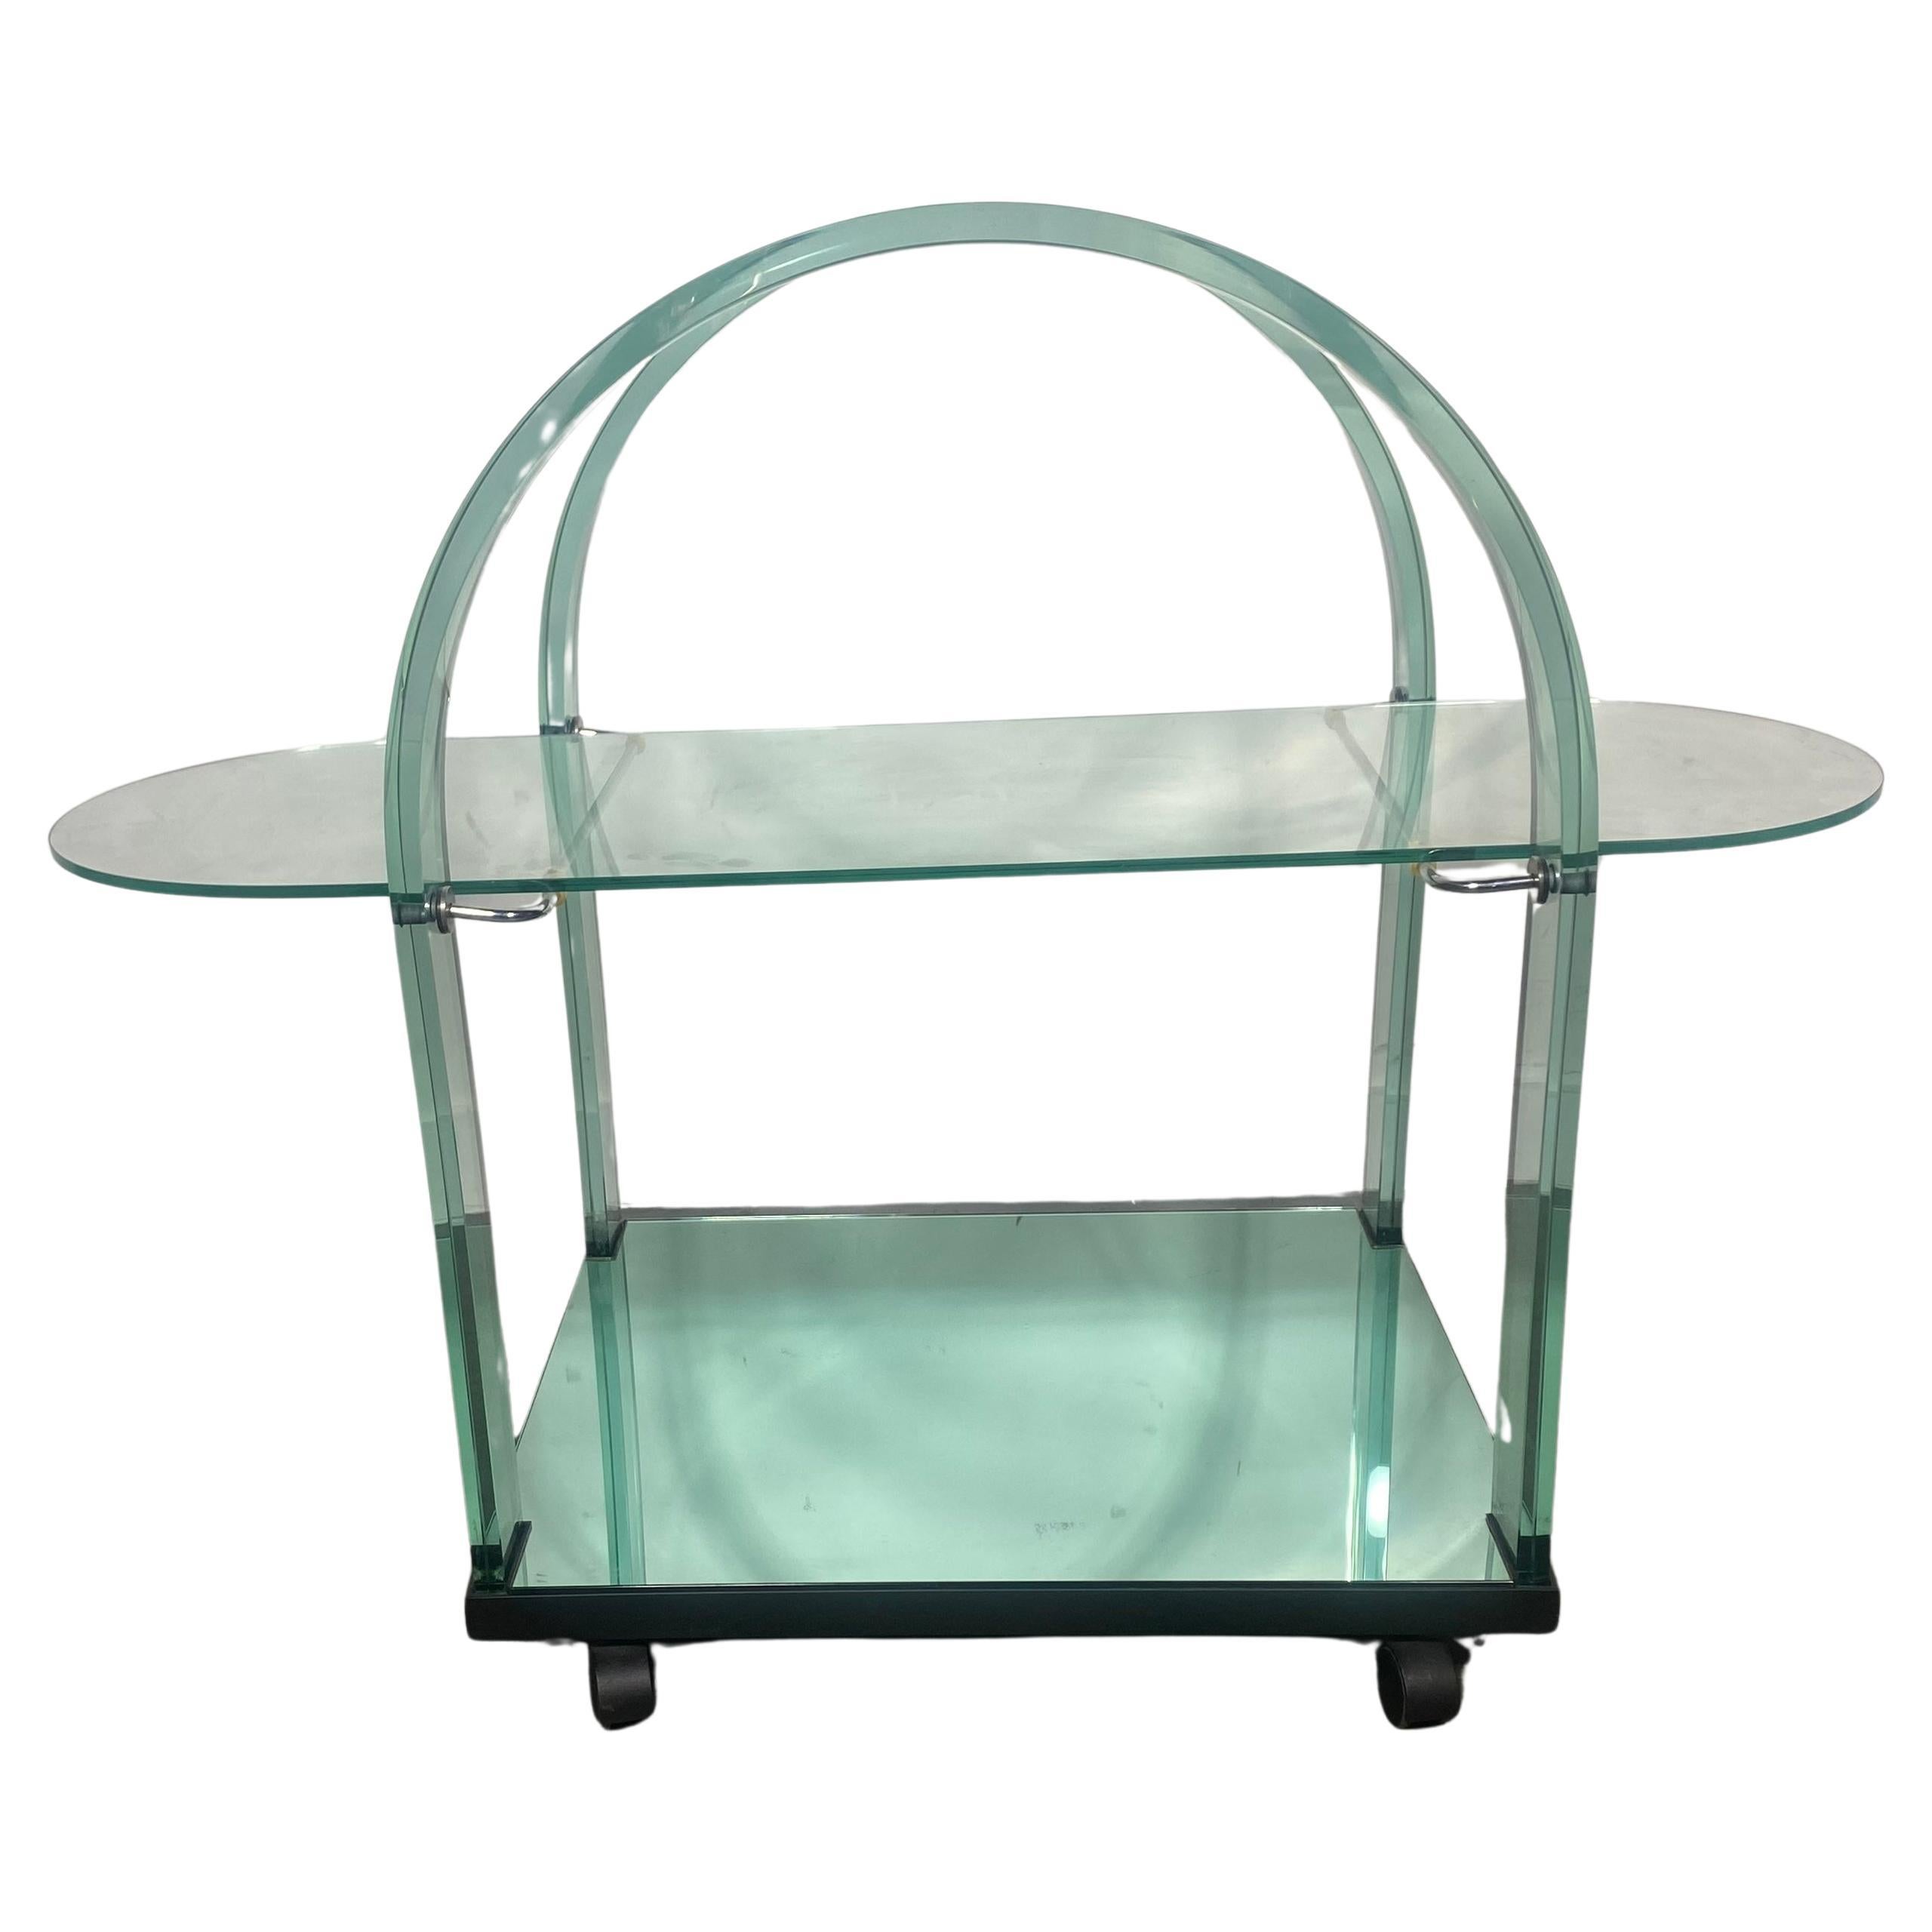 Post Modernist Curved Glass + Mirrored Bar Cart by Fiam Italia, 1980s Memphis